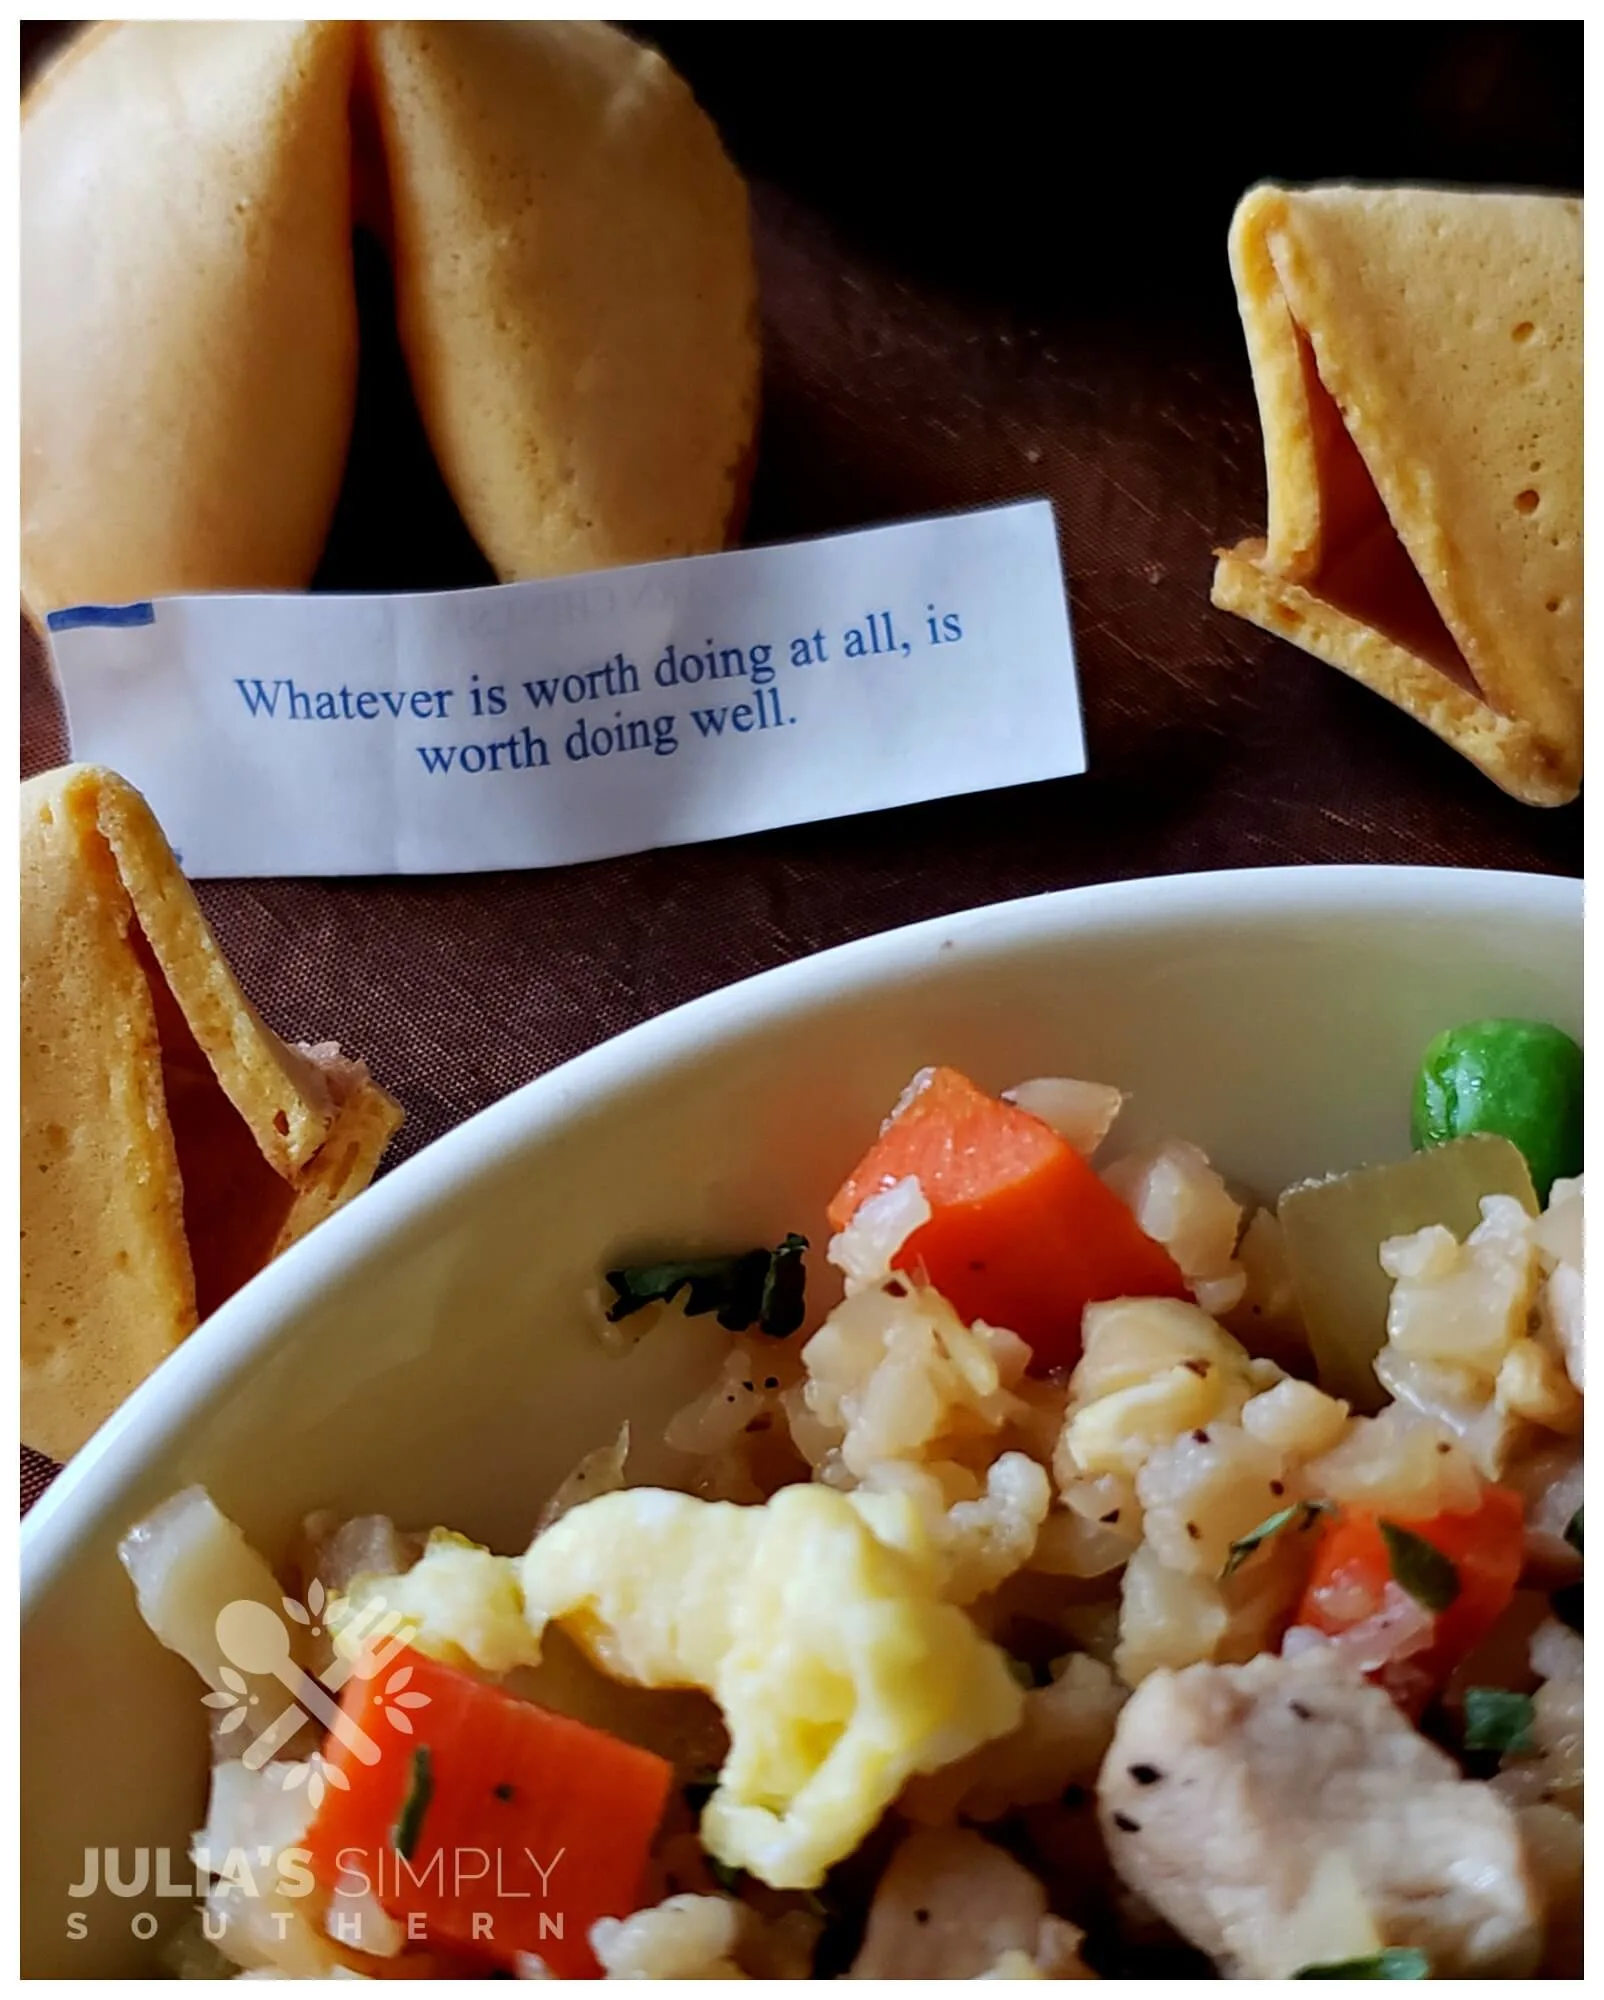 Great fortune cookie quotes